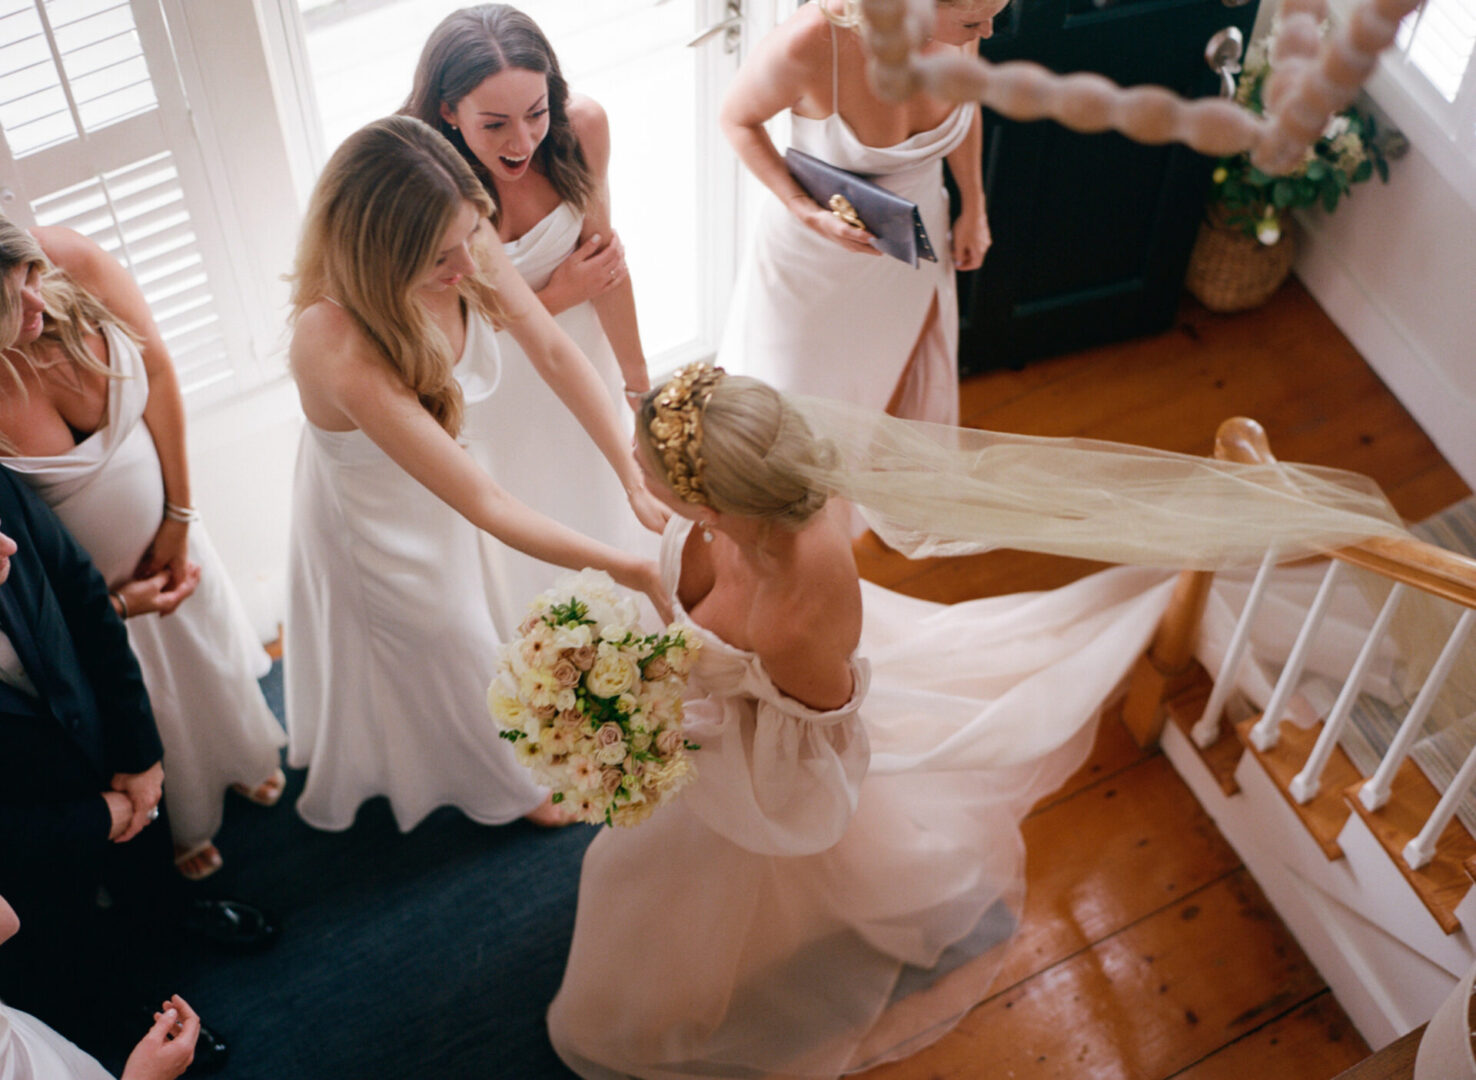 The bride is welcomed by her maids of honor